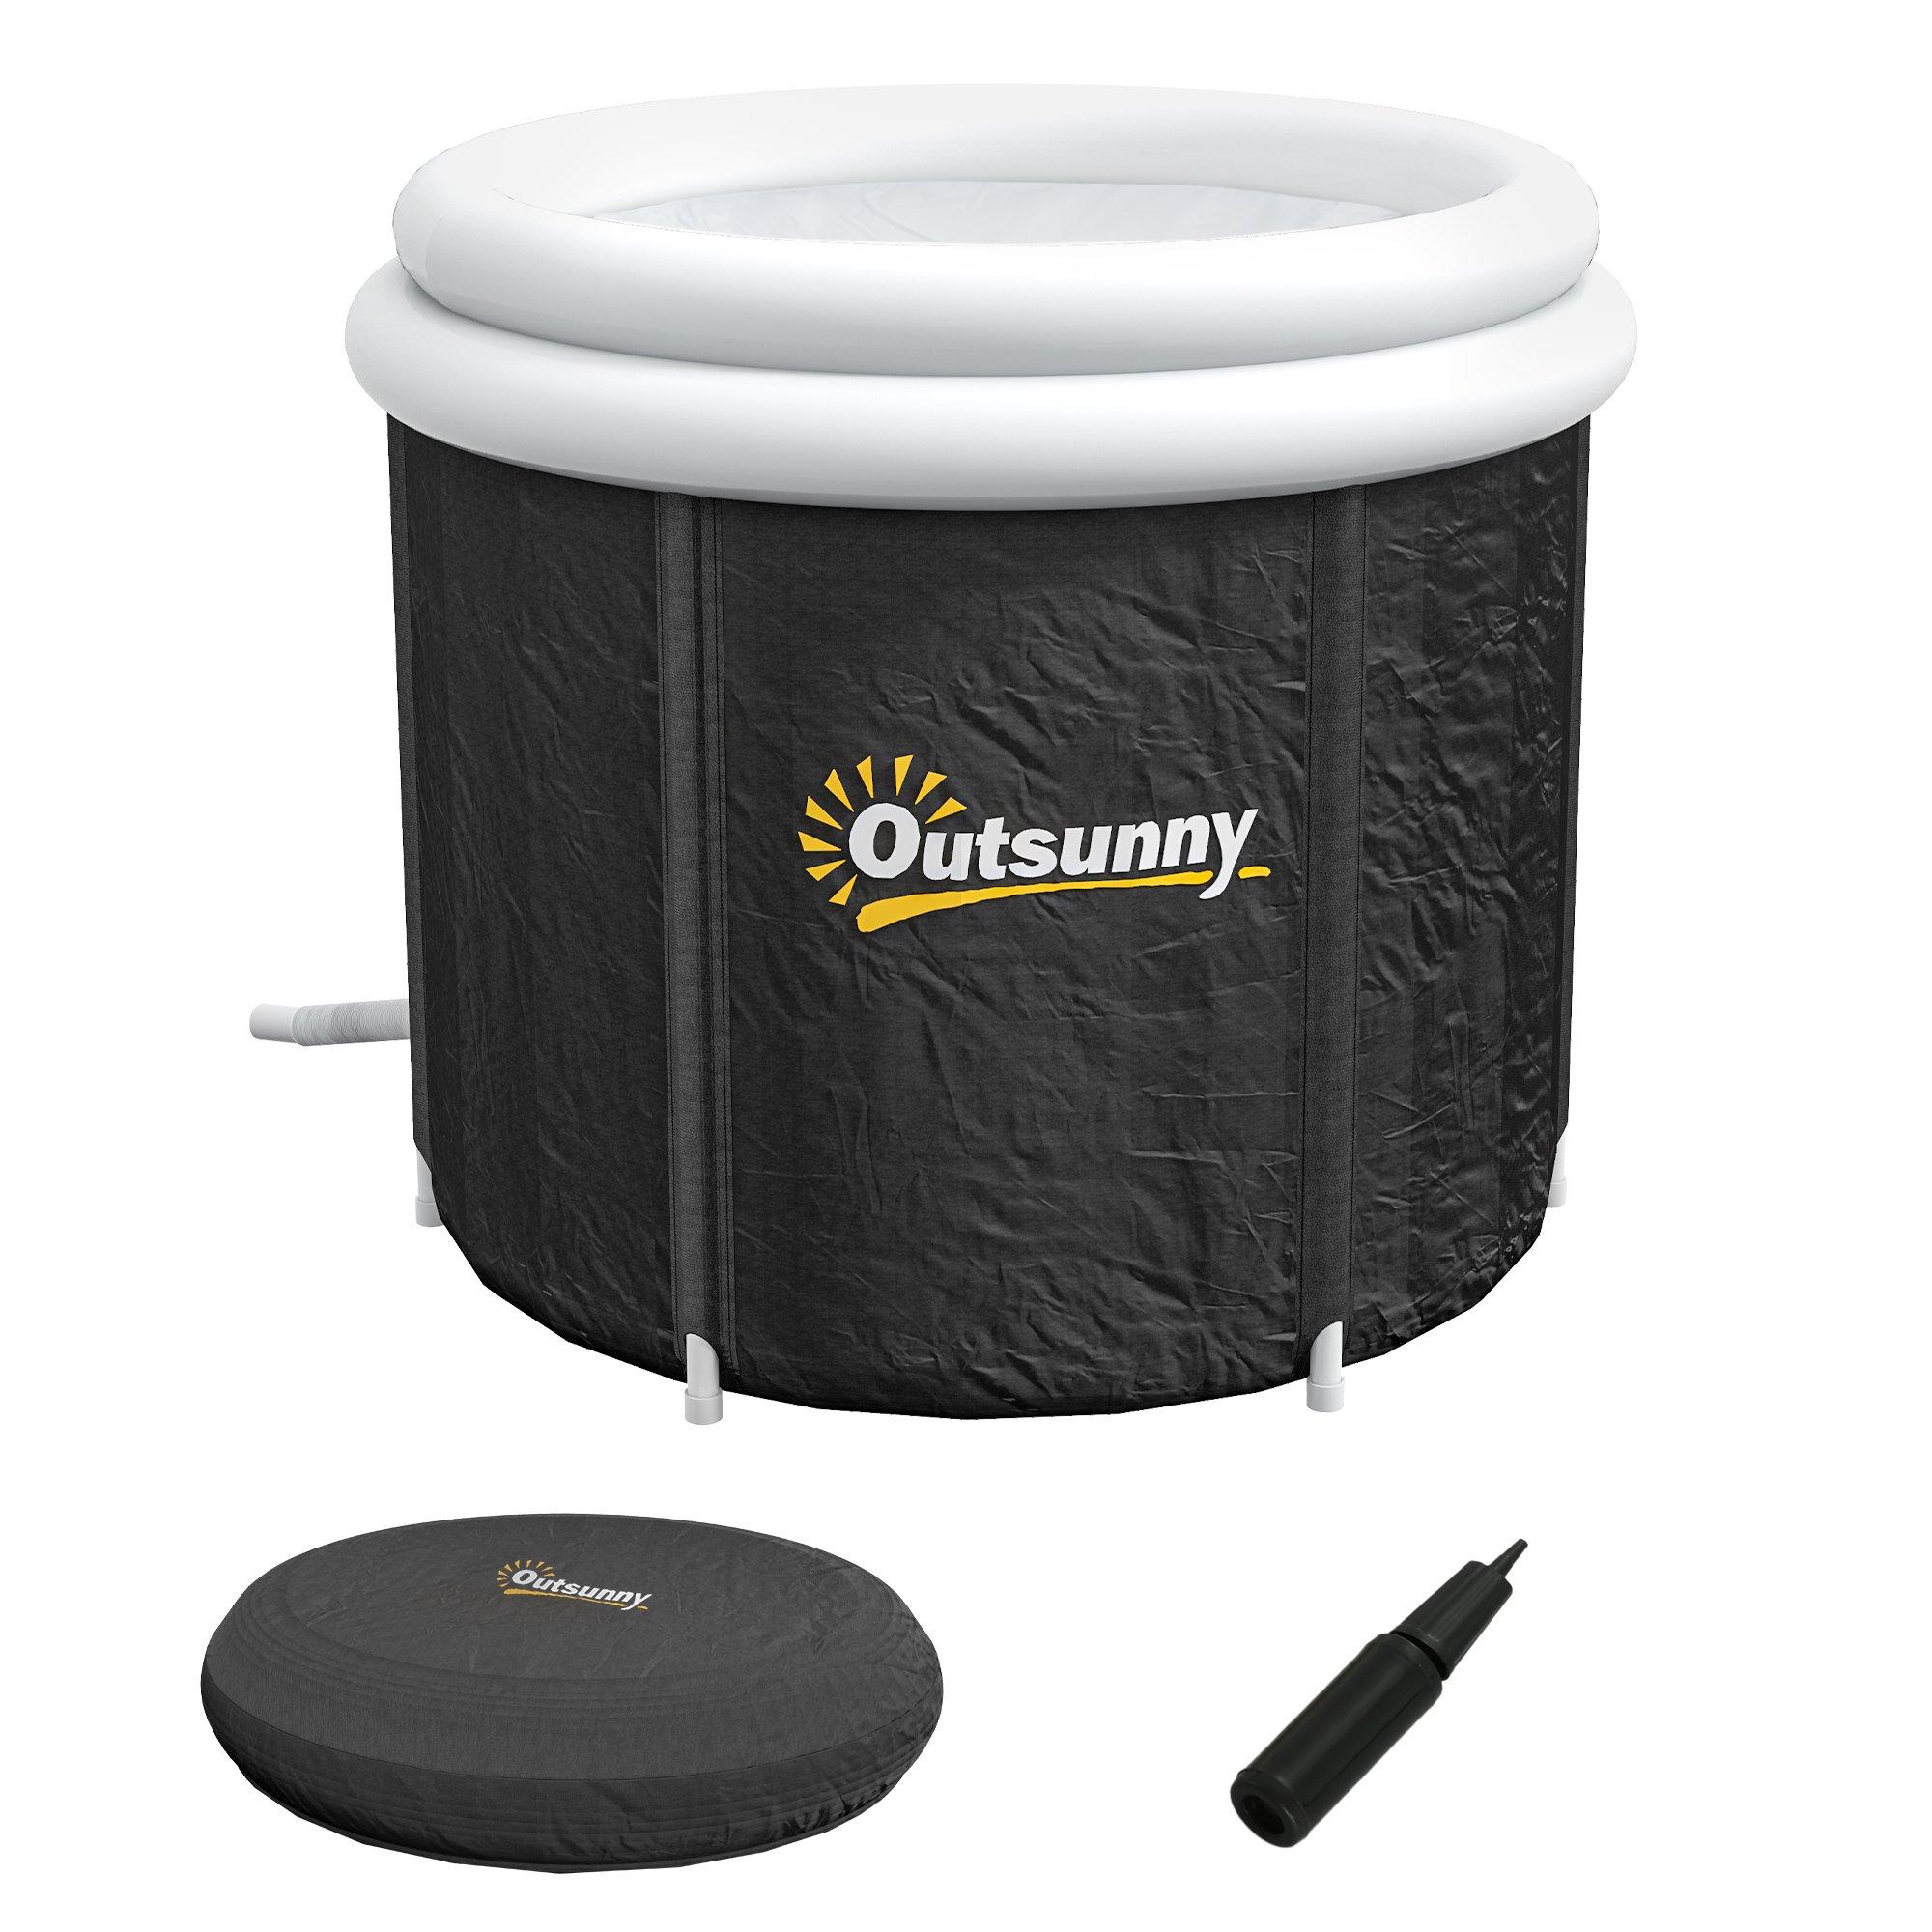 Polar Recovery Tub, Portable Ice Bath for Cold Water Therapy Training - Black